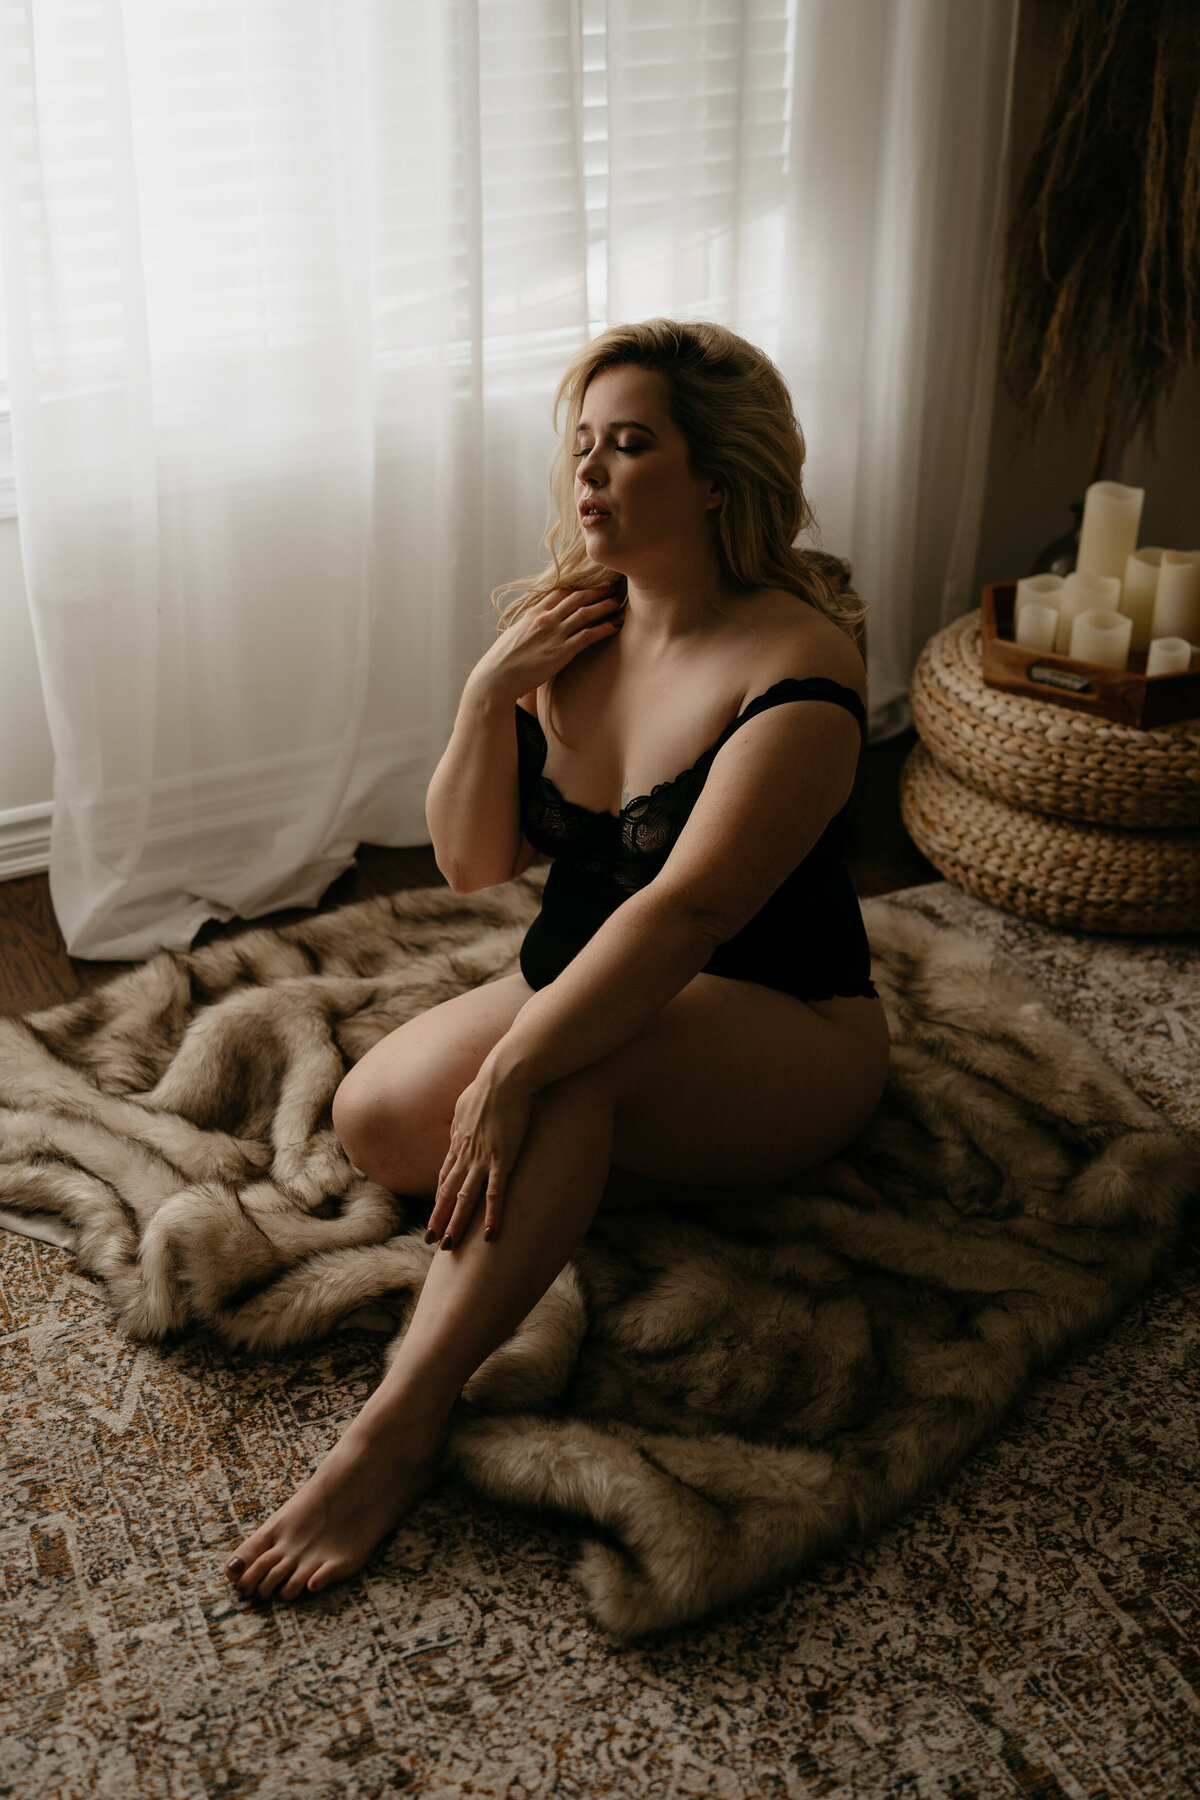 woman with blonde hair sitting on fur rug